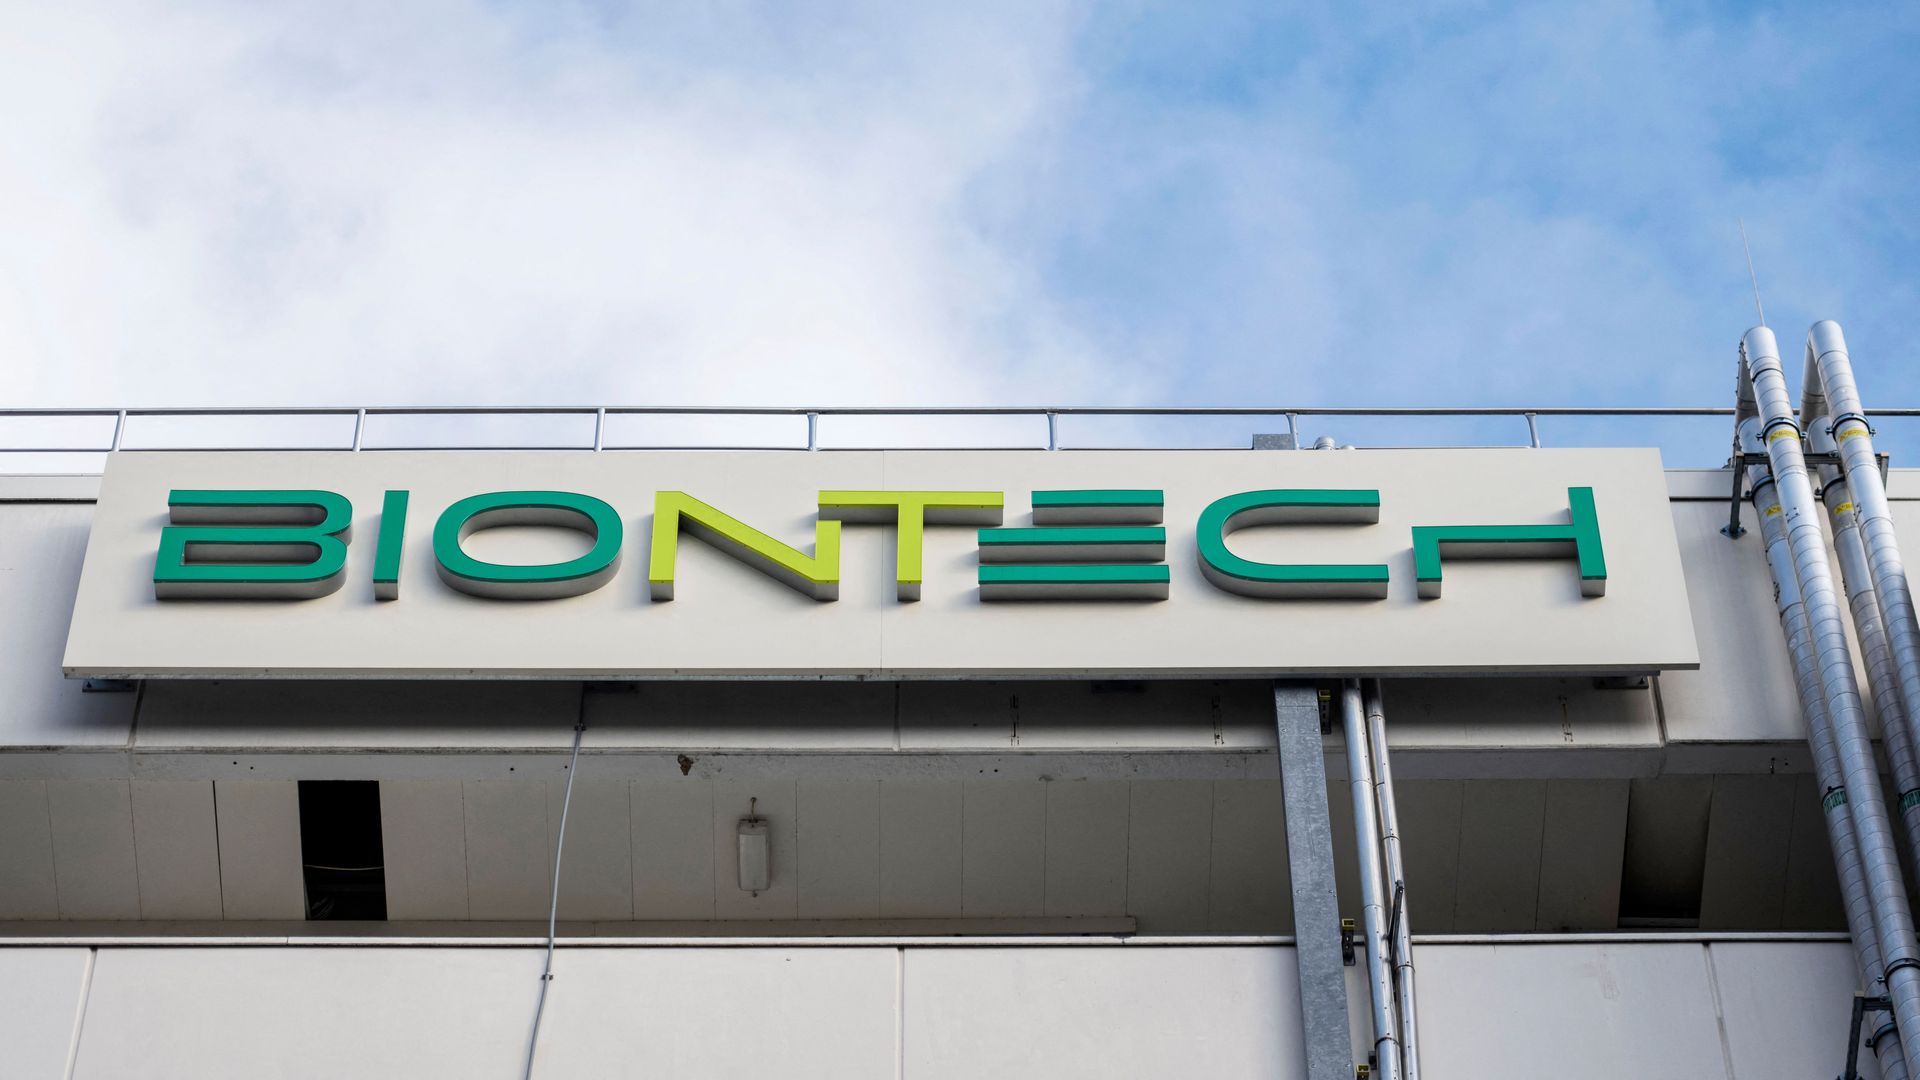 he facade of the new manufacturing site of German company BioNTech for the production of the COVID-19 vaccine in Marburg.